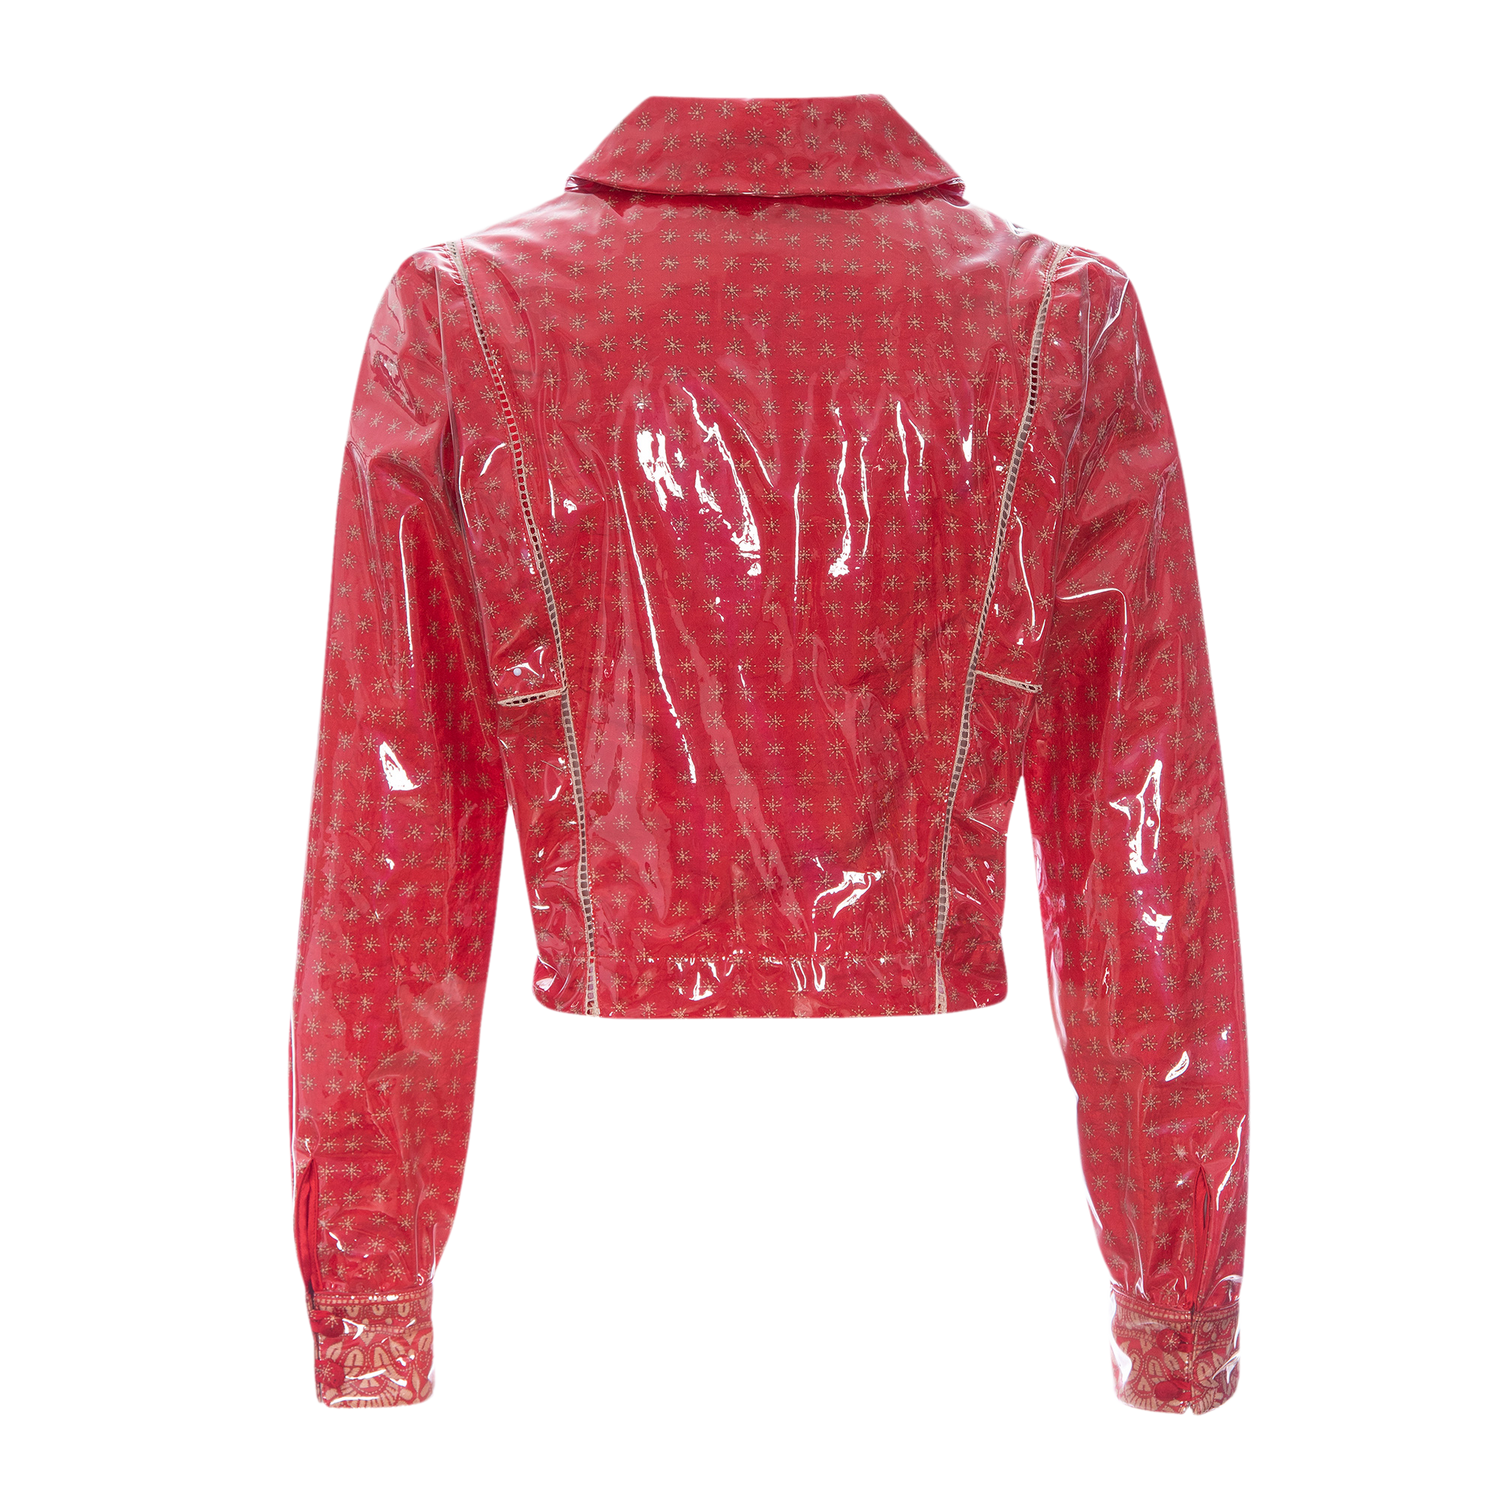 Archive Jacket—Lacquer Red